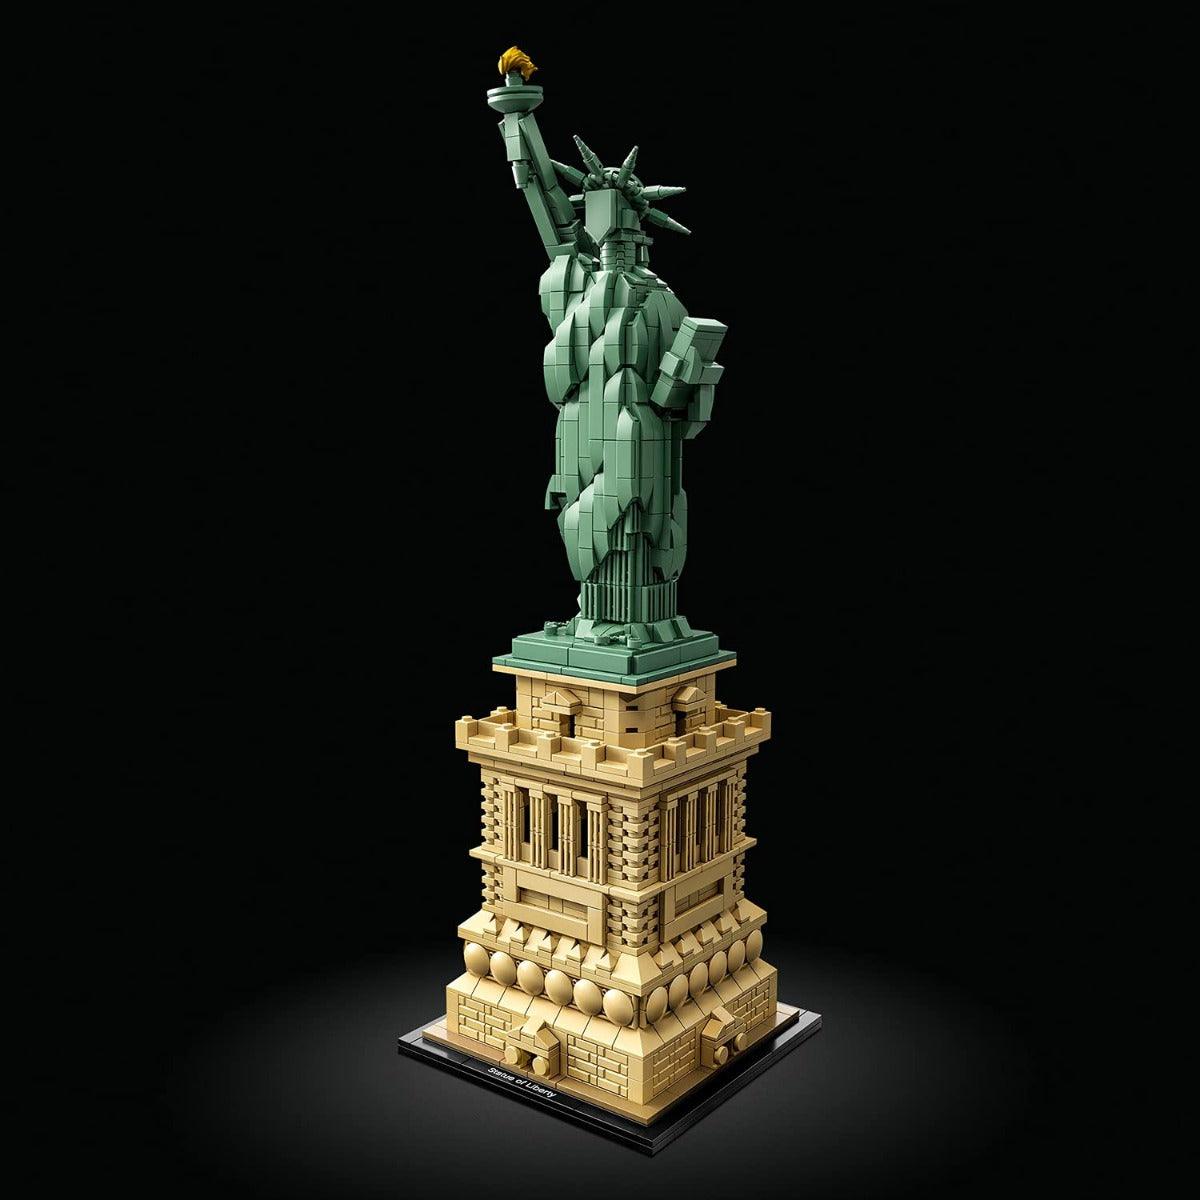 Lego Architecture Statue of Liberty Building Kit For Ages 16+